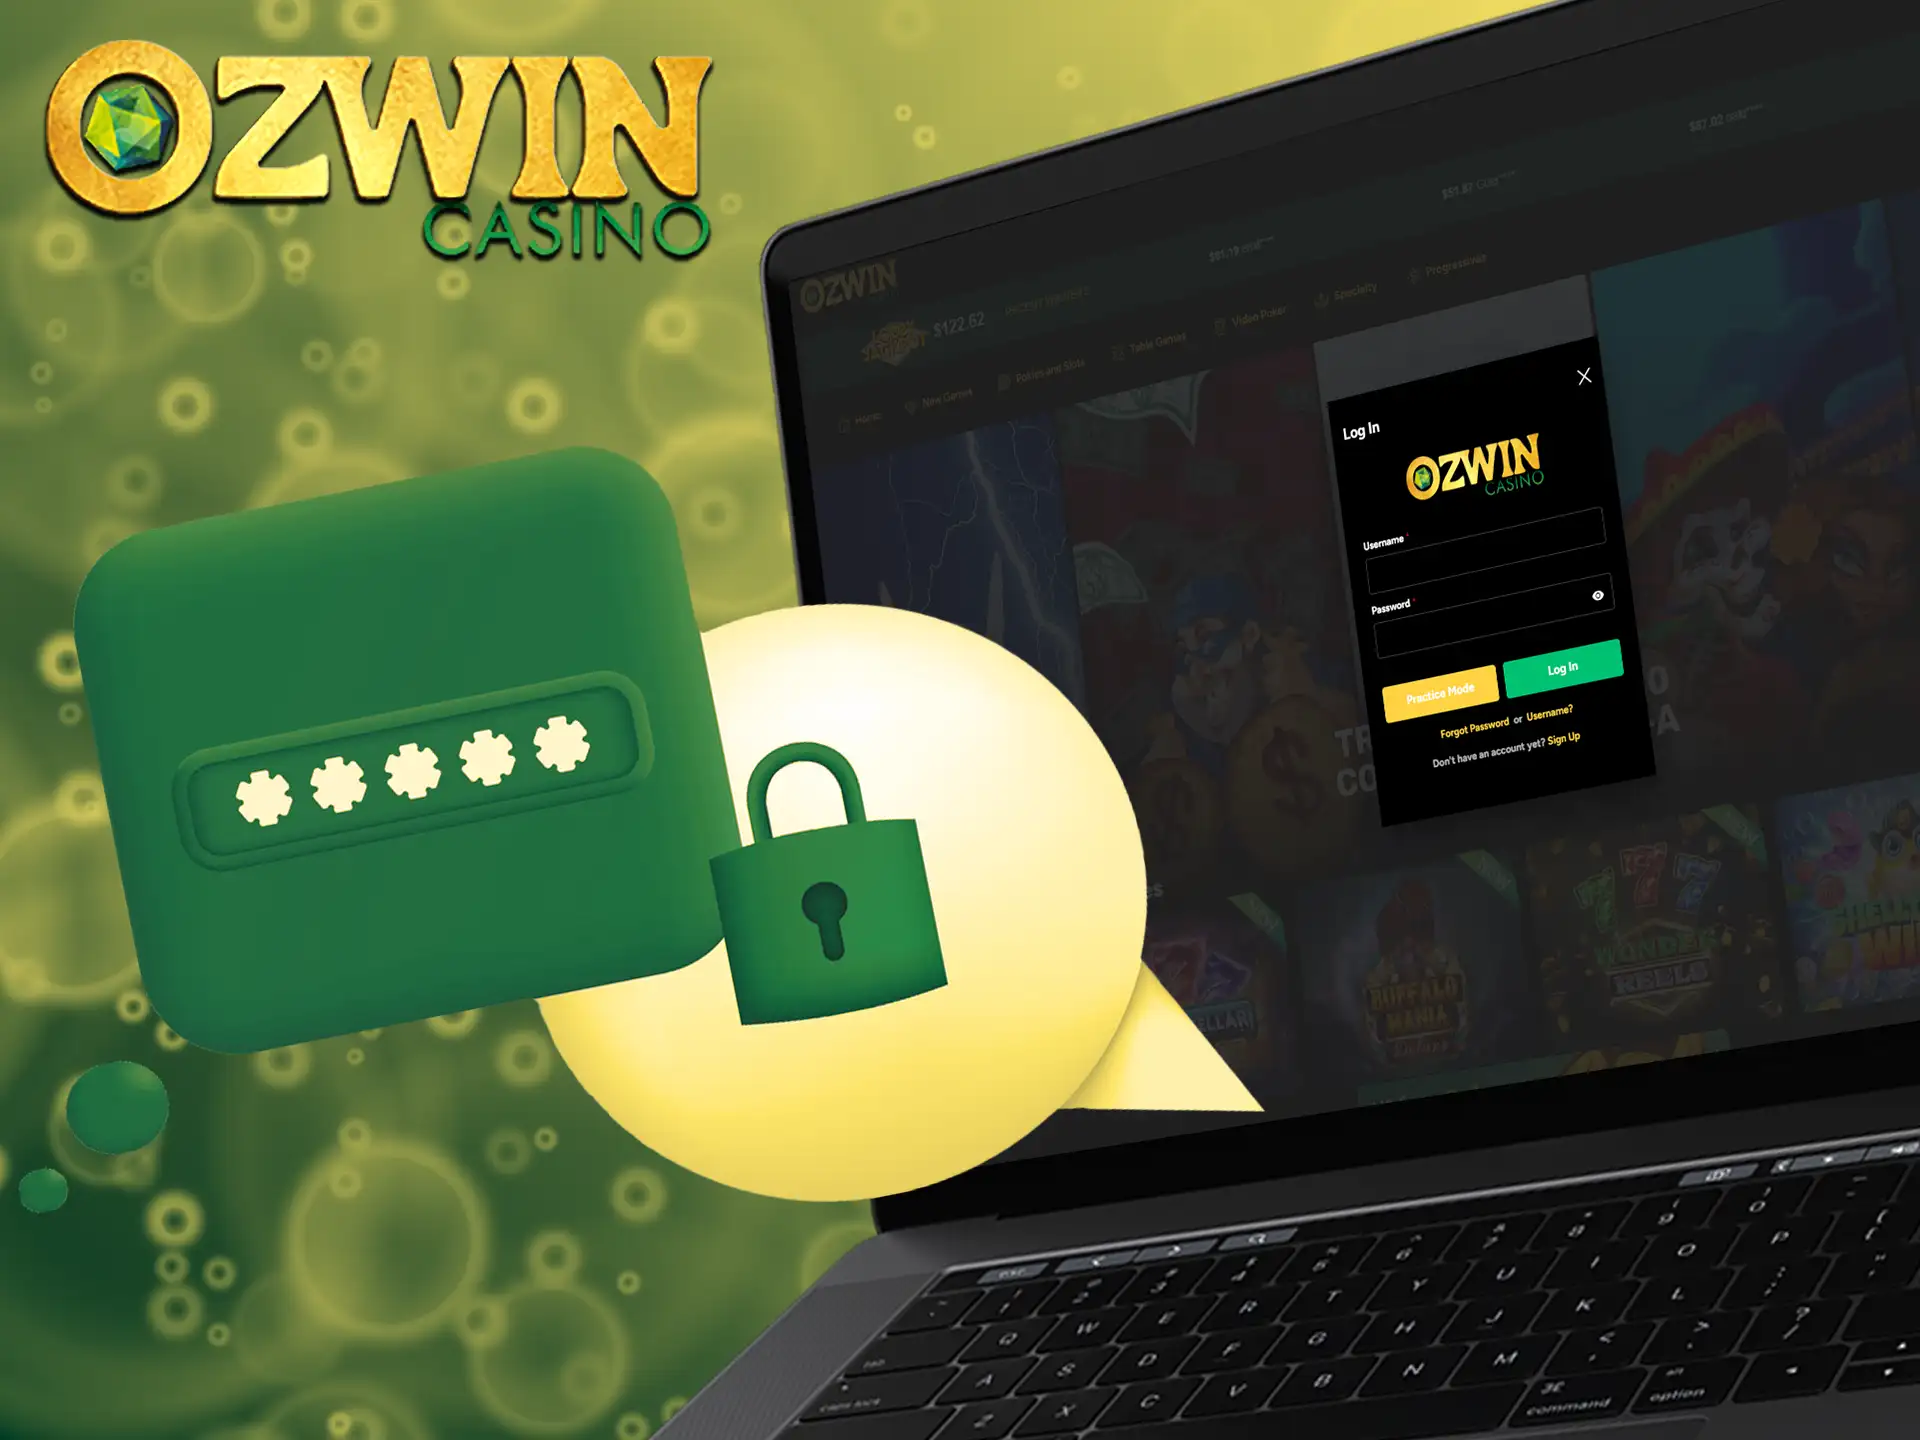 Log in to your account to experience all that Ozwin has to offer.